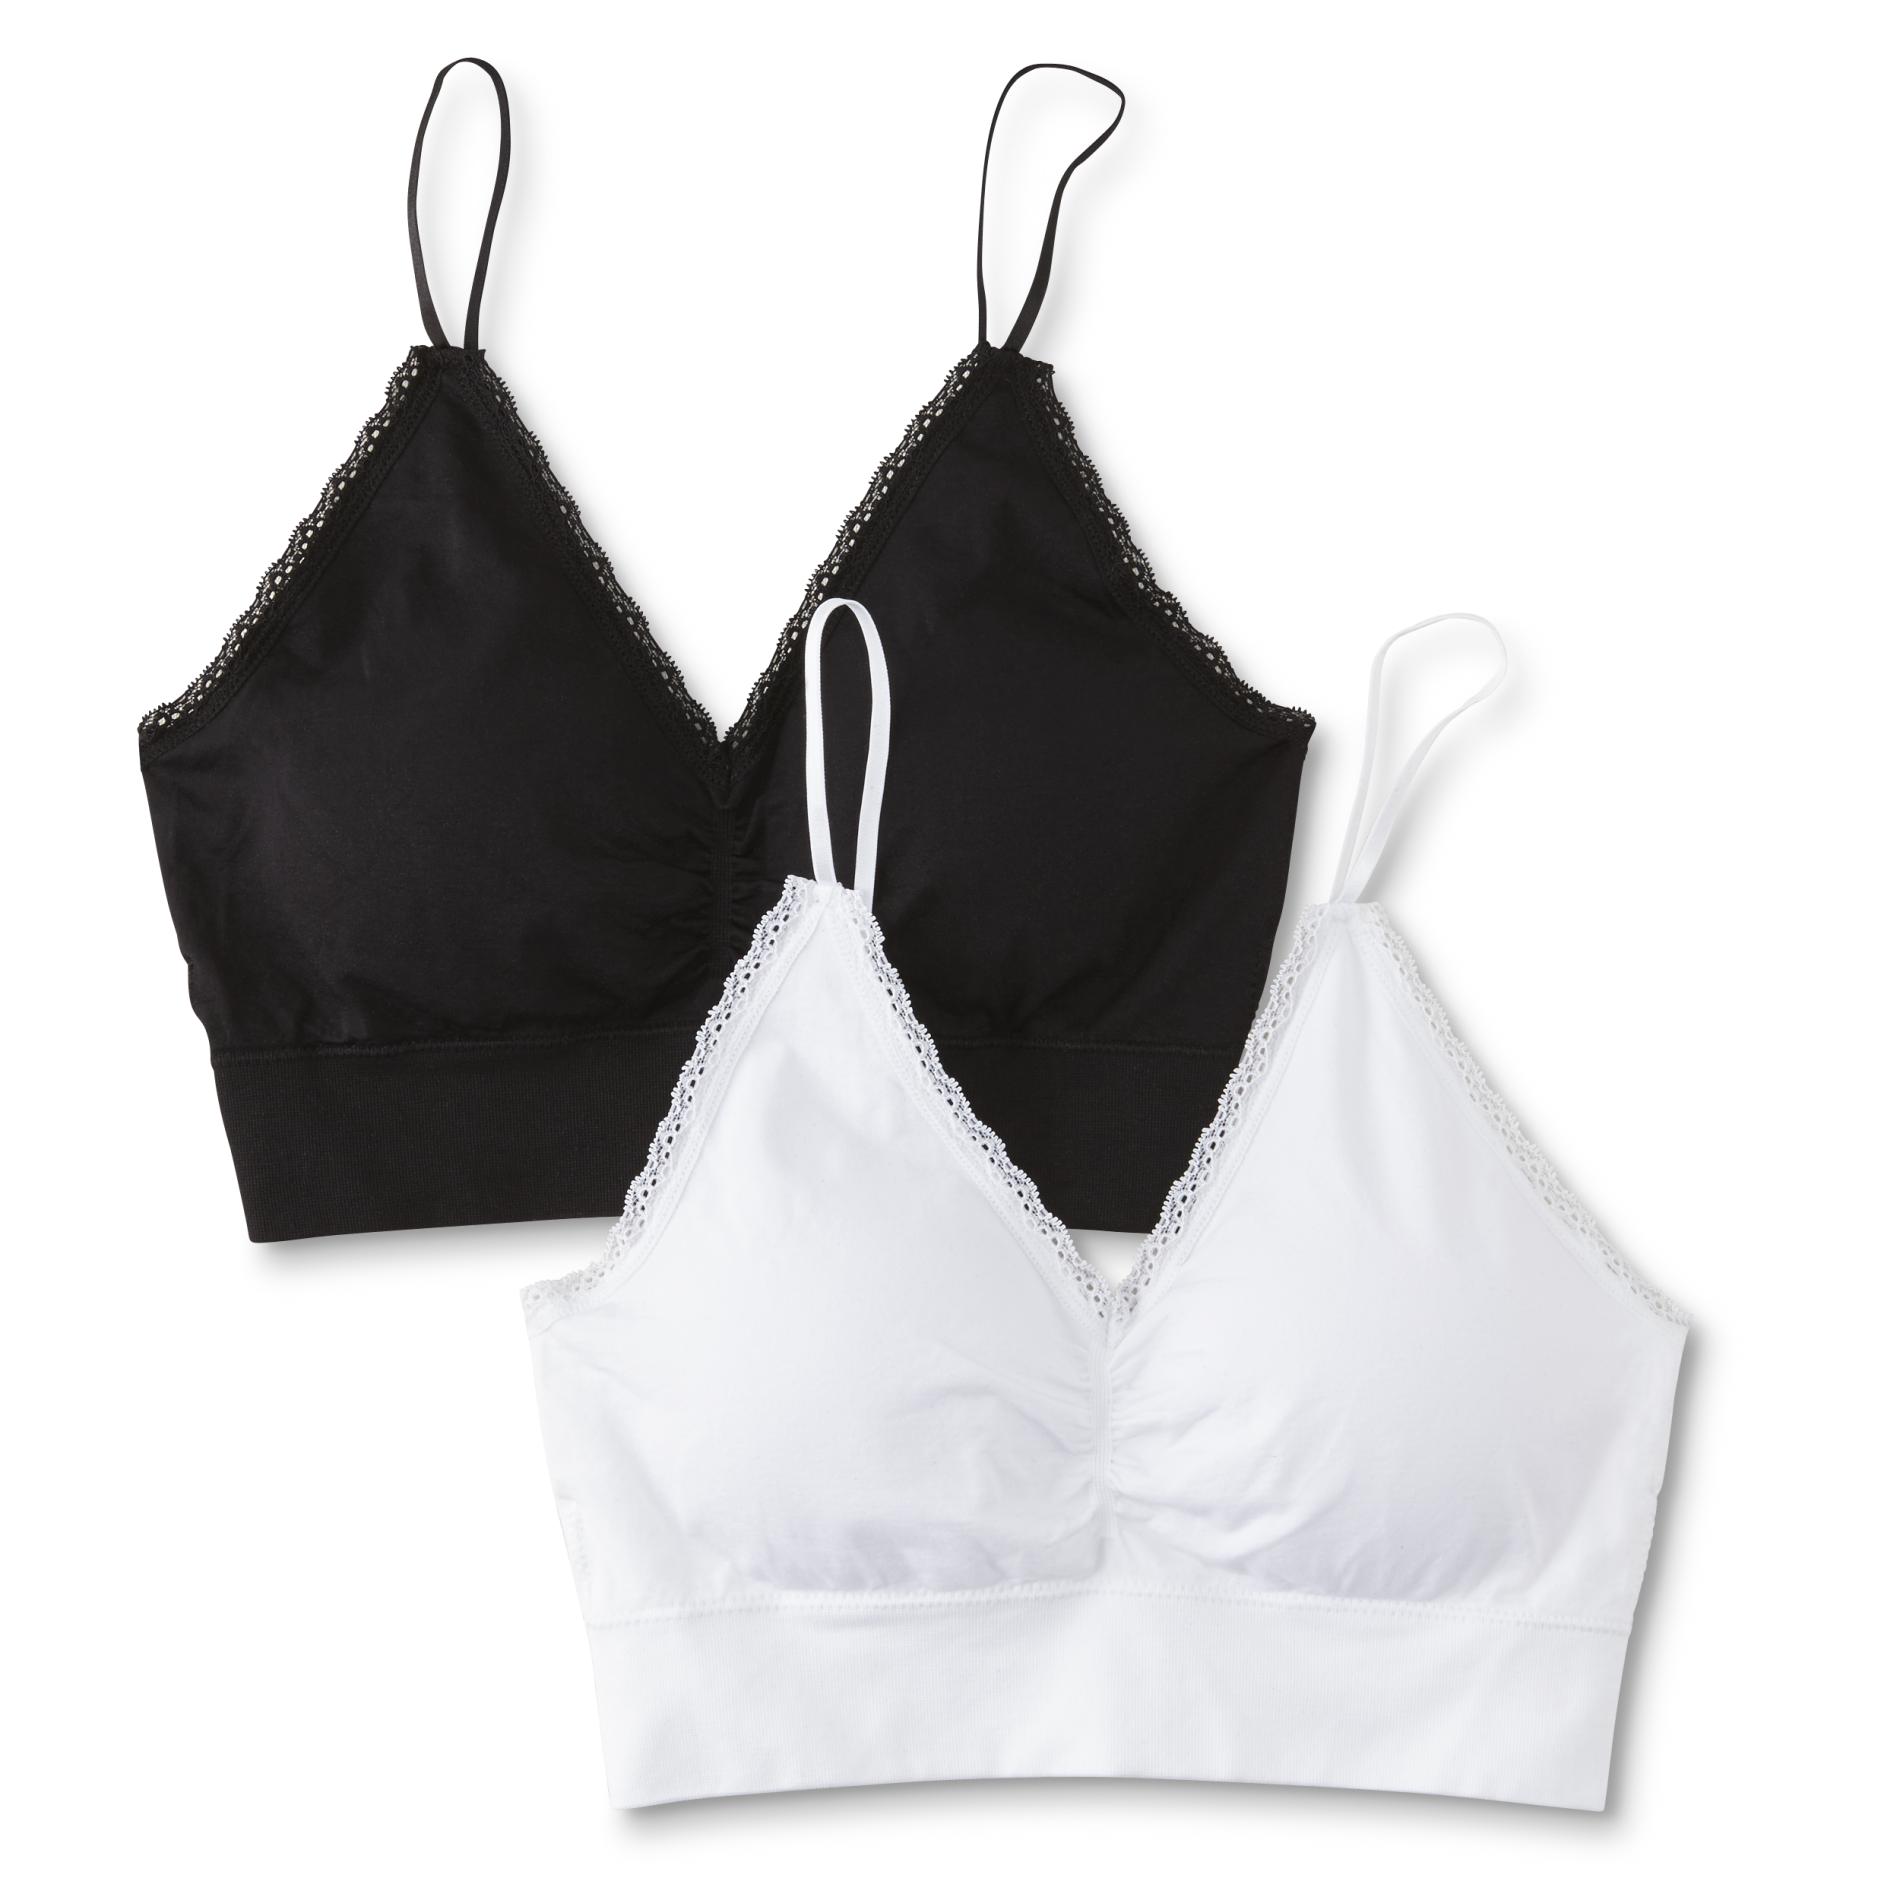 Simply Styled Women's 2-Pack Seamless Bralettes